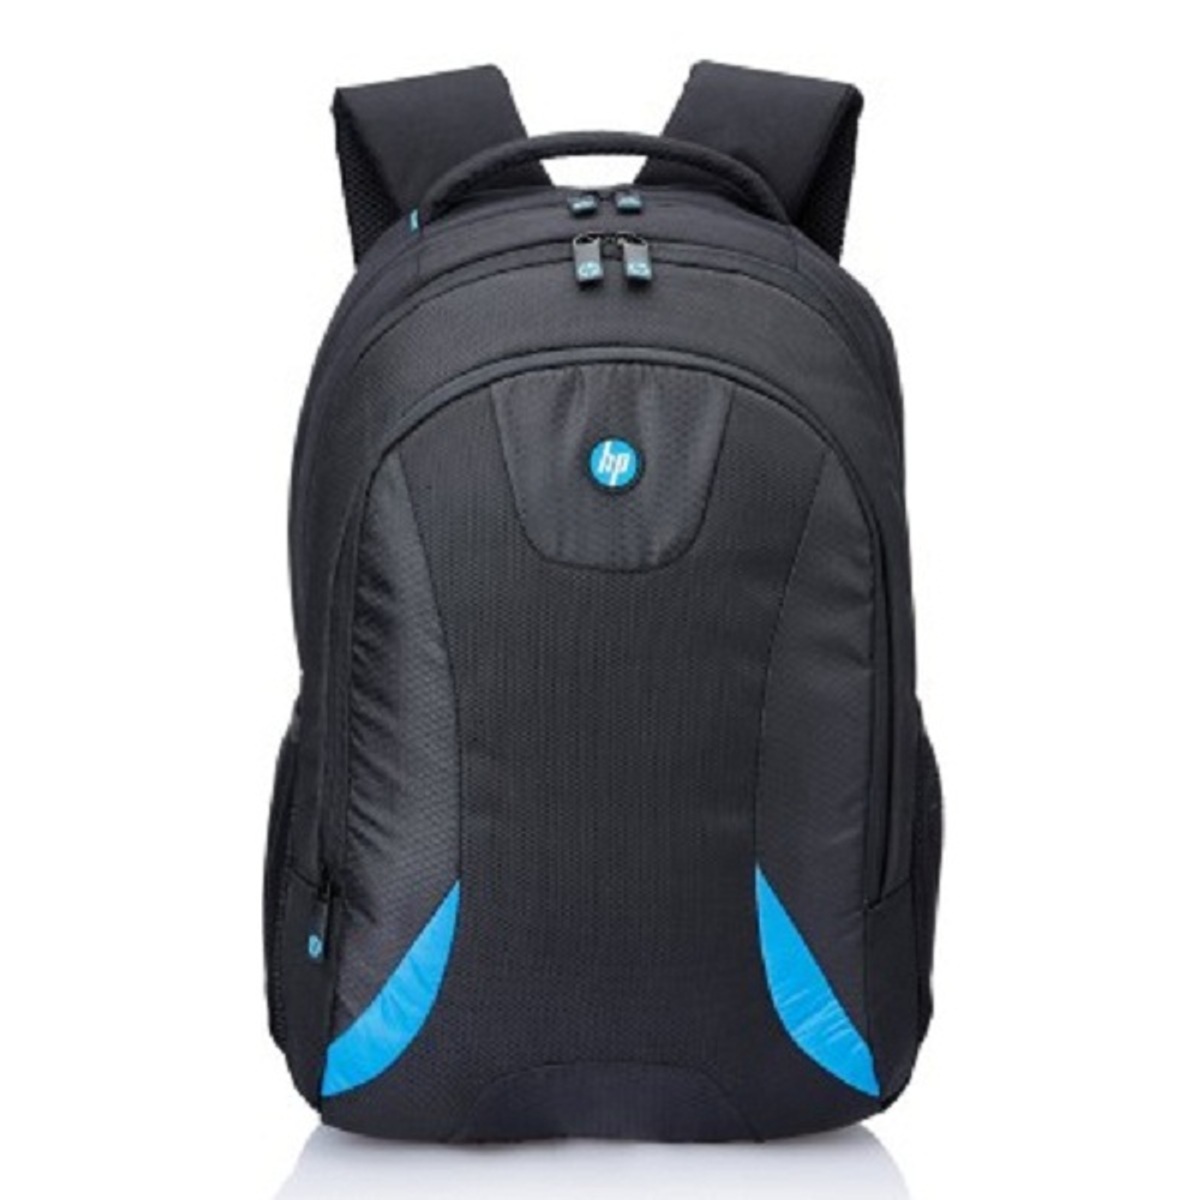 HP 15 inch Laptop Backpack